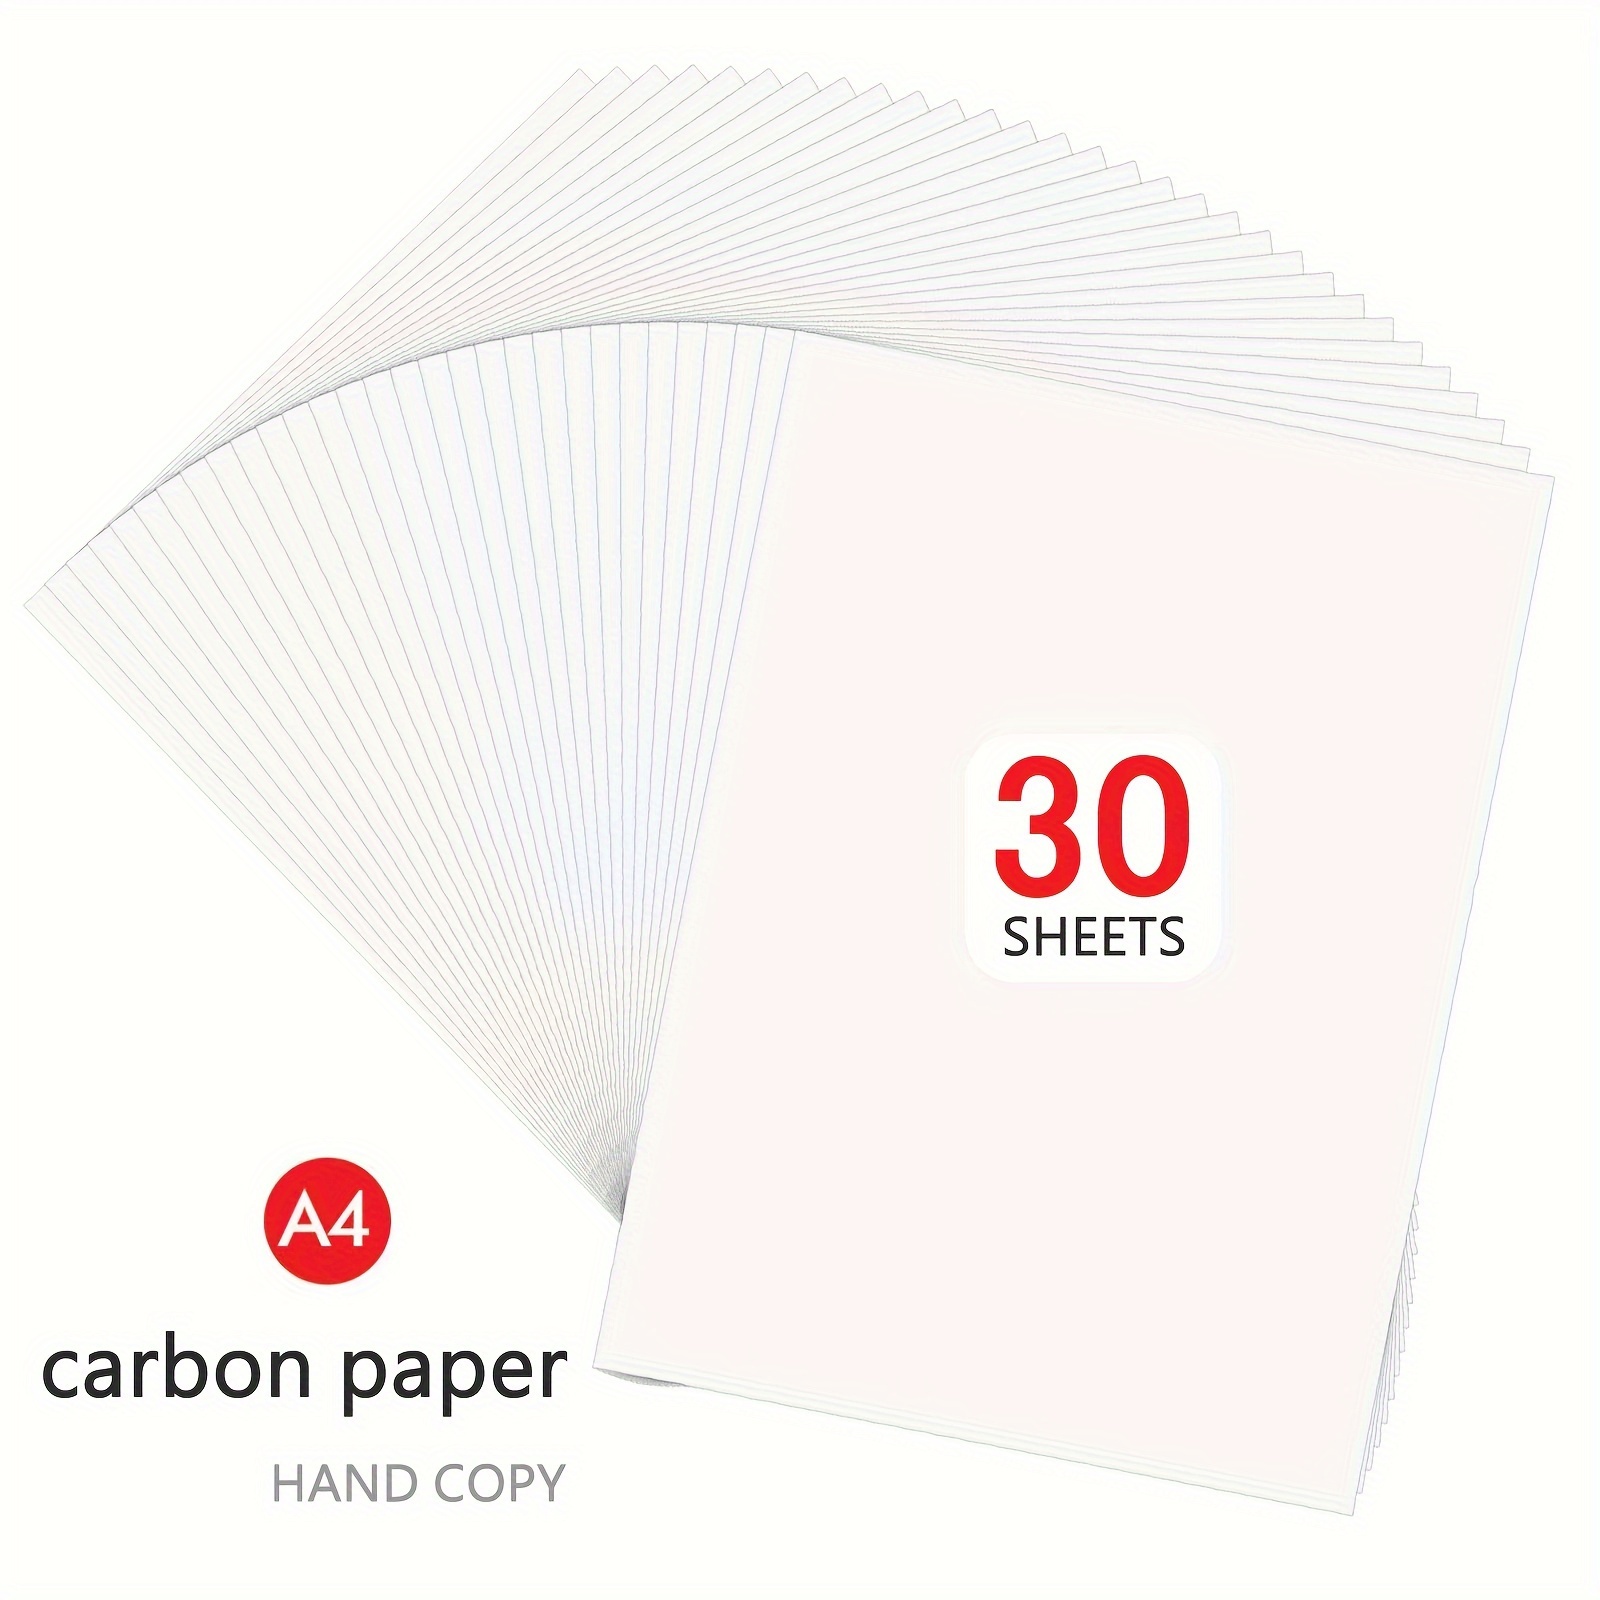 30pcs White Carbon Transfer Paper For Wood Burning Craft, Paper, Canvas And  Other Art Craft Surfaces A4 Size 8.27 X 11.81 Inch